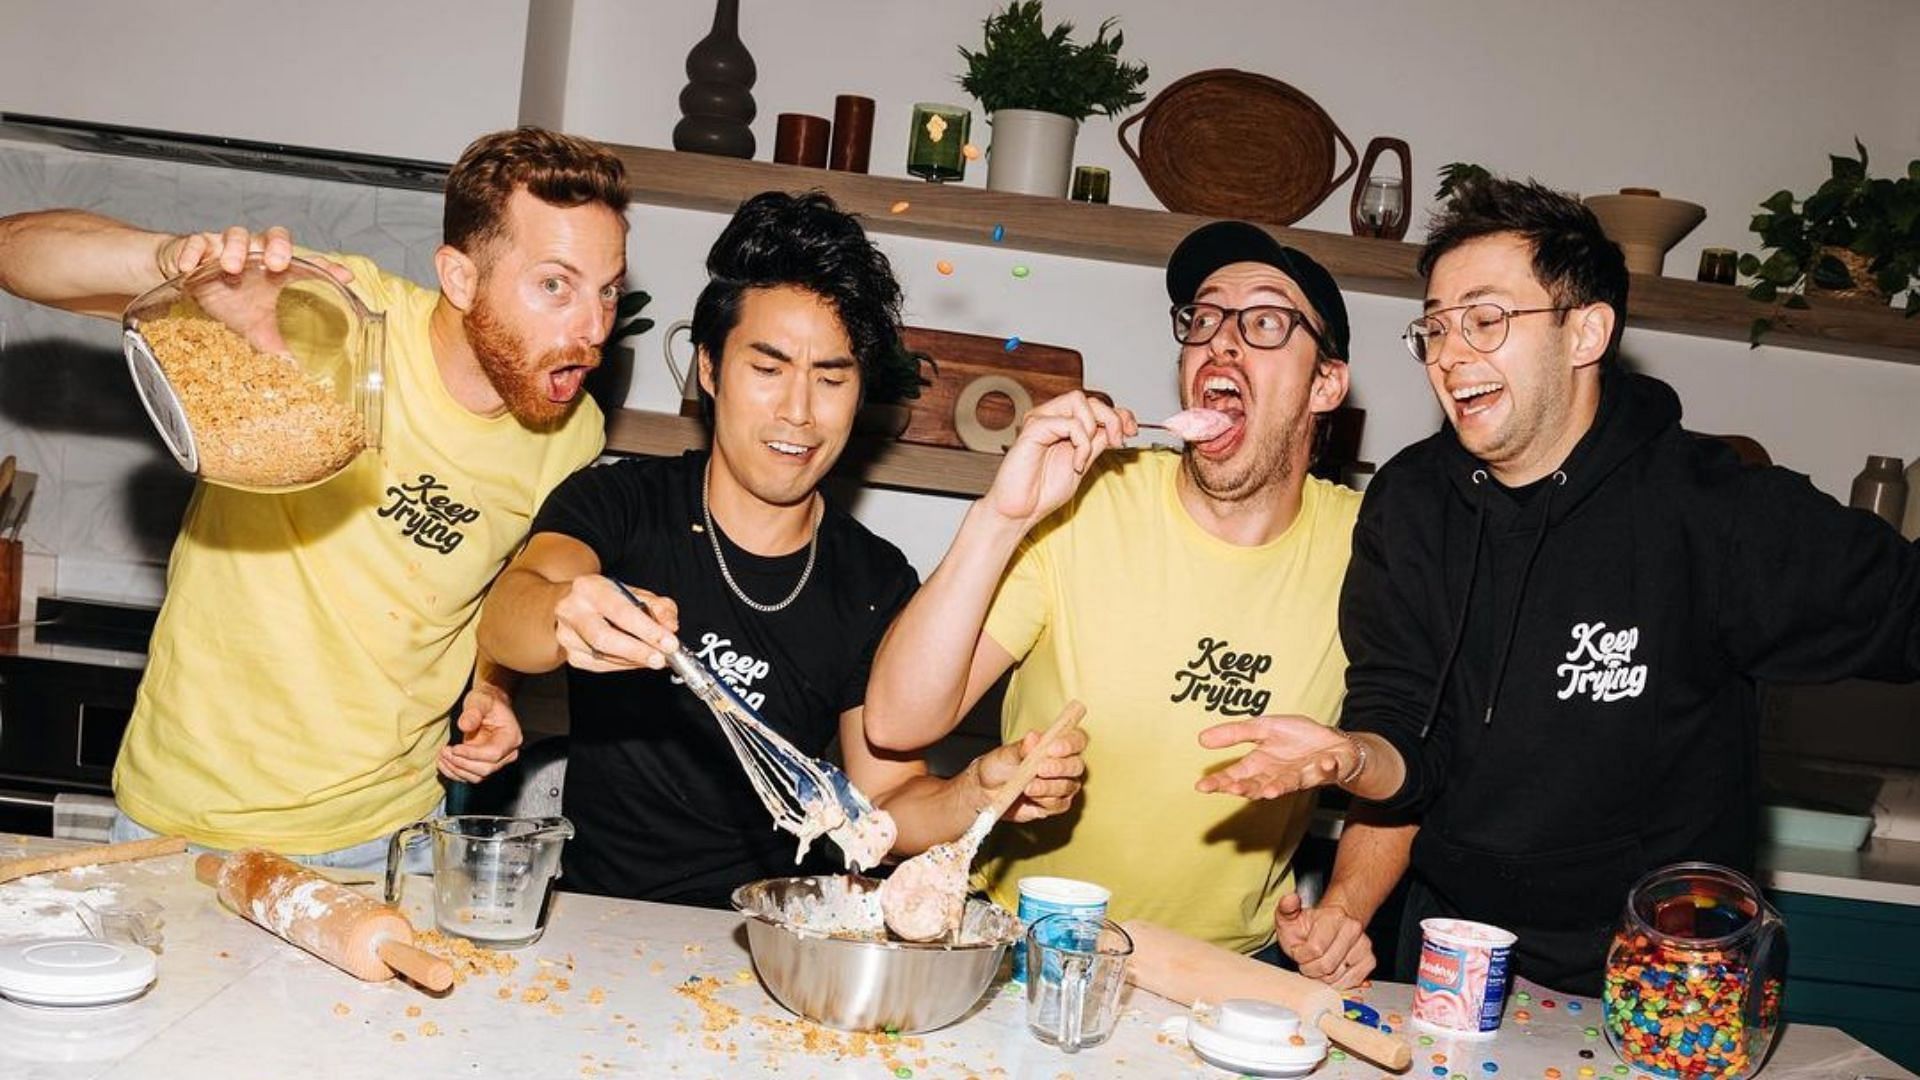 No Recipe Roadtrip with the Try Guys is set to air on August 31